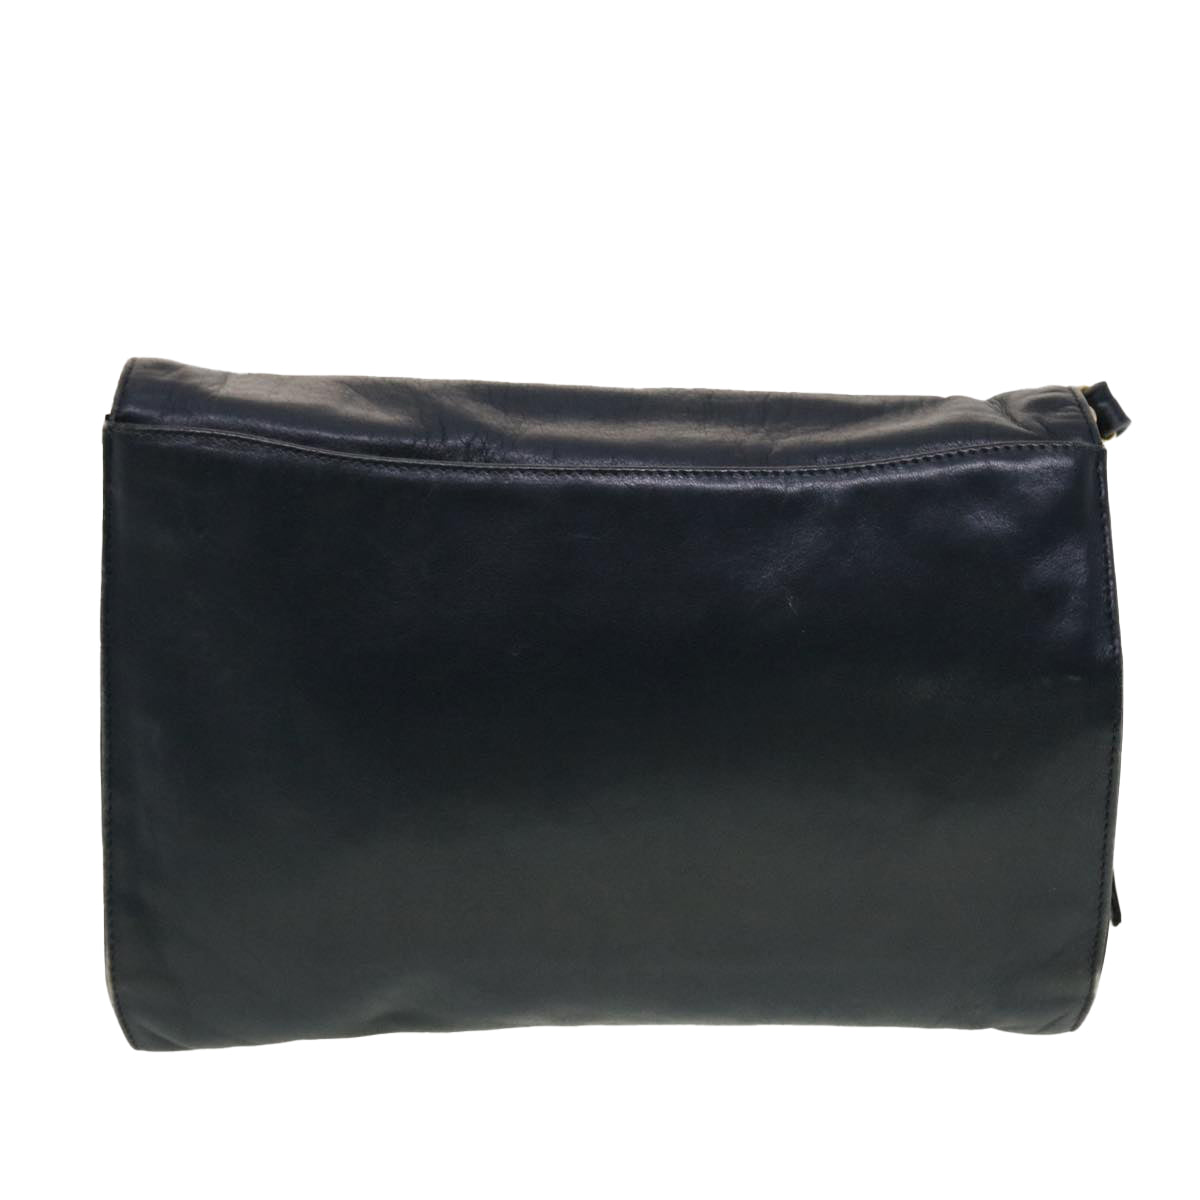 VALENTINO Shoulder Bag Leather Navy Auth bs5210 - 0